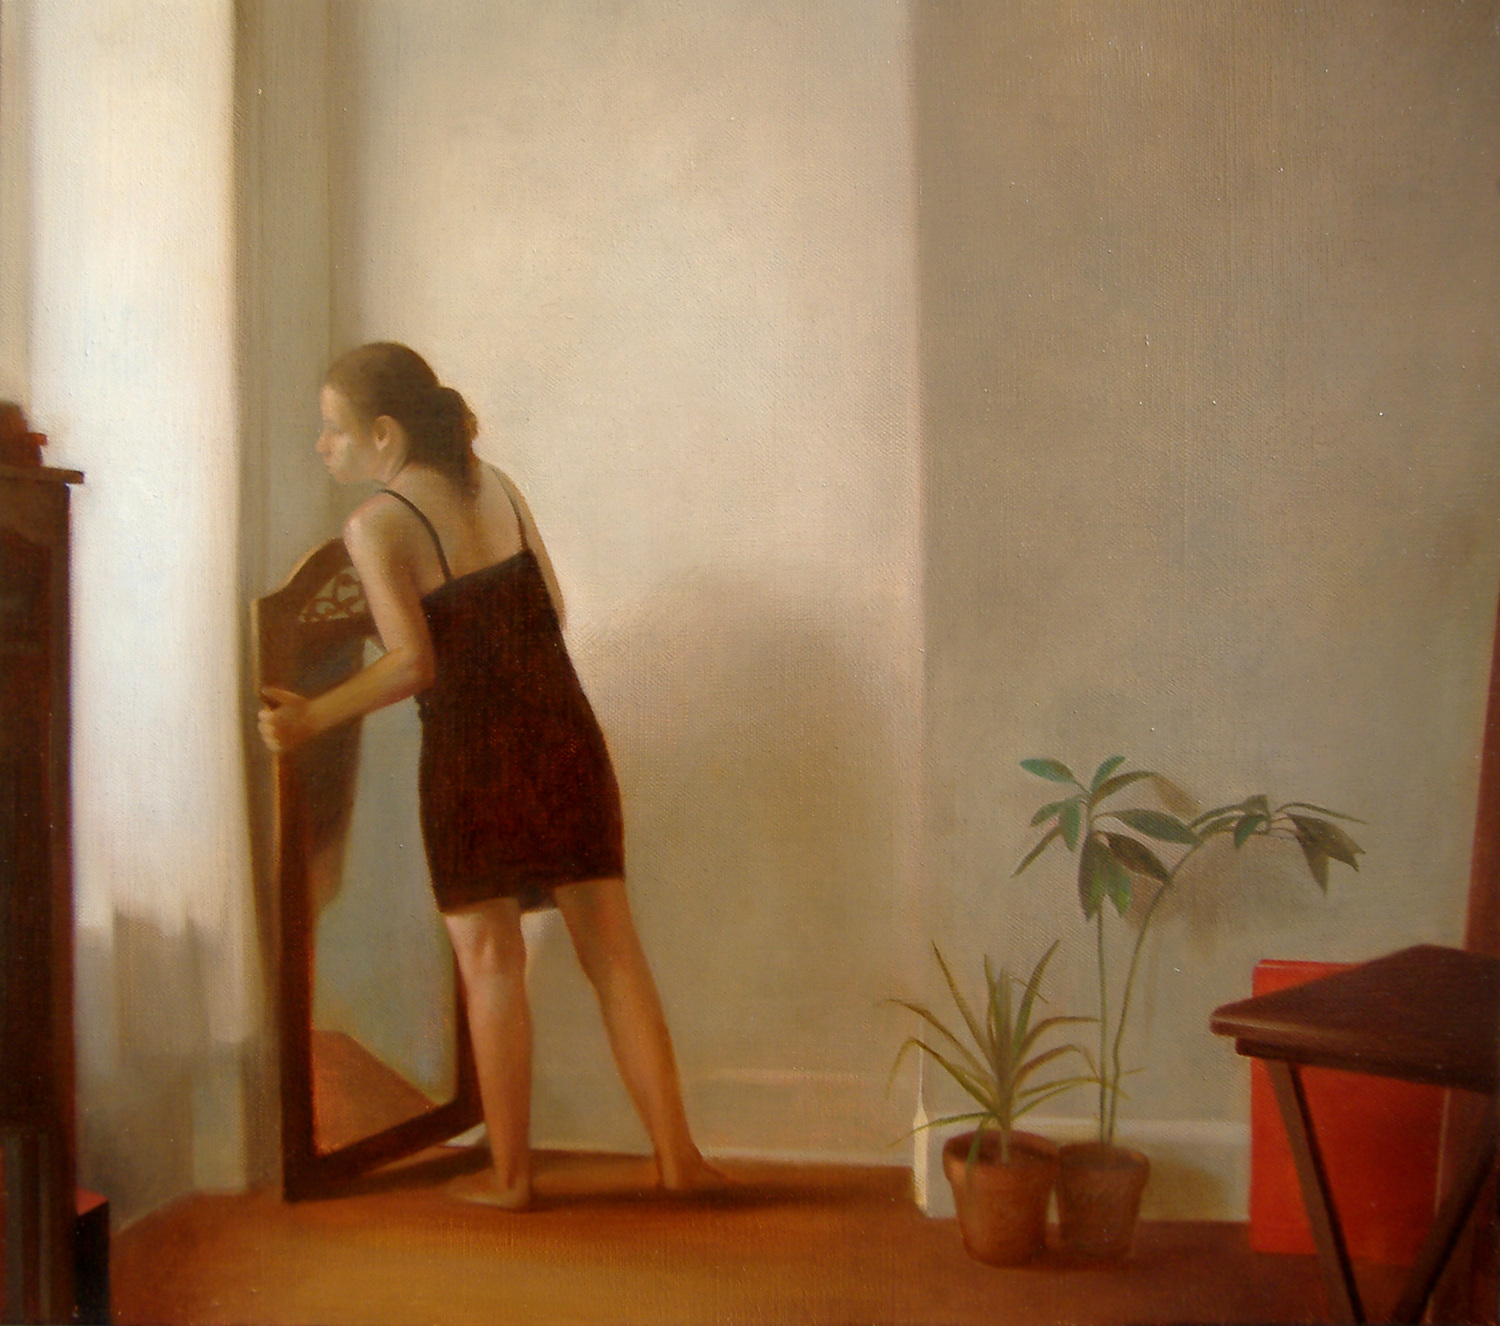   Woman Moving a Mirror , 2007, Oil on linen, 18 x 24 inches, Private collection 